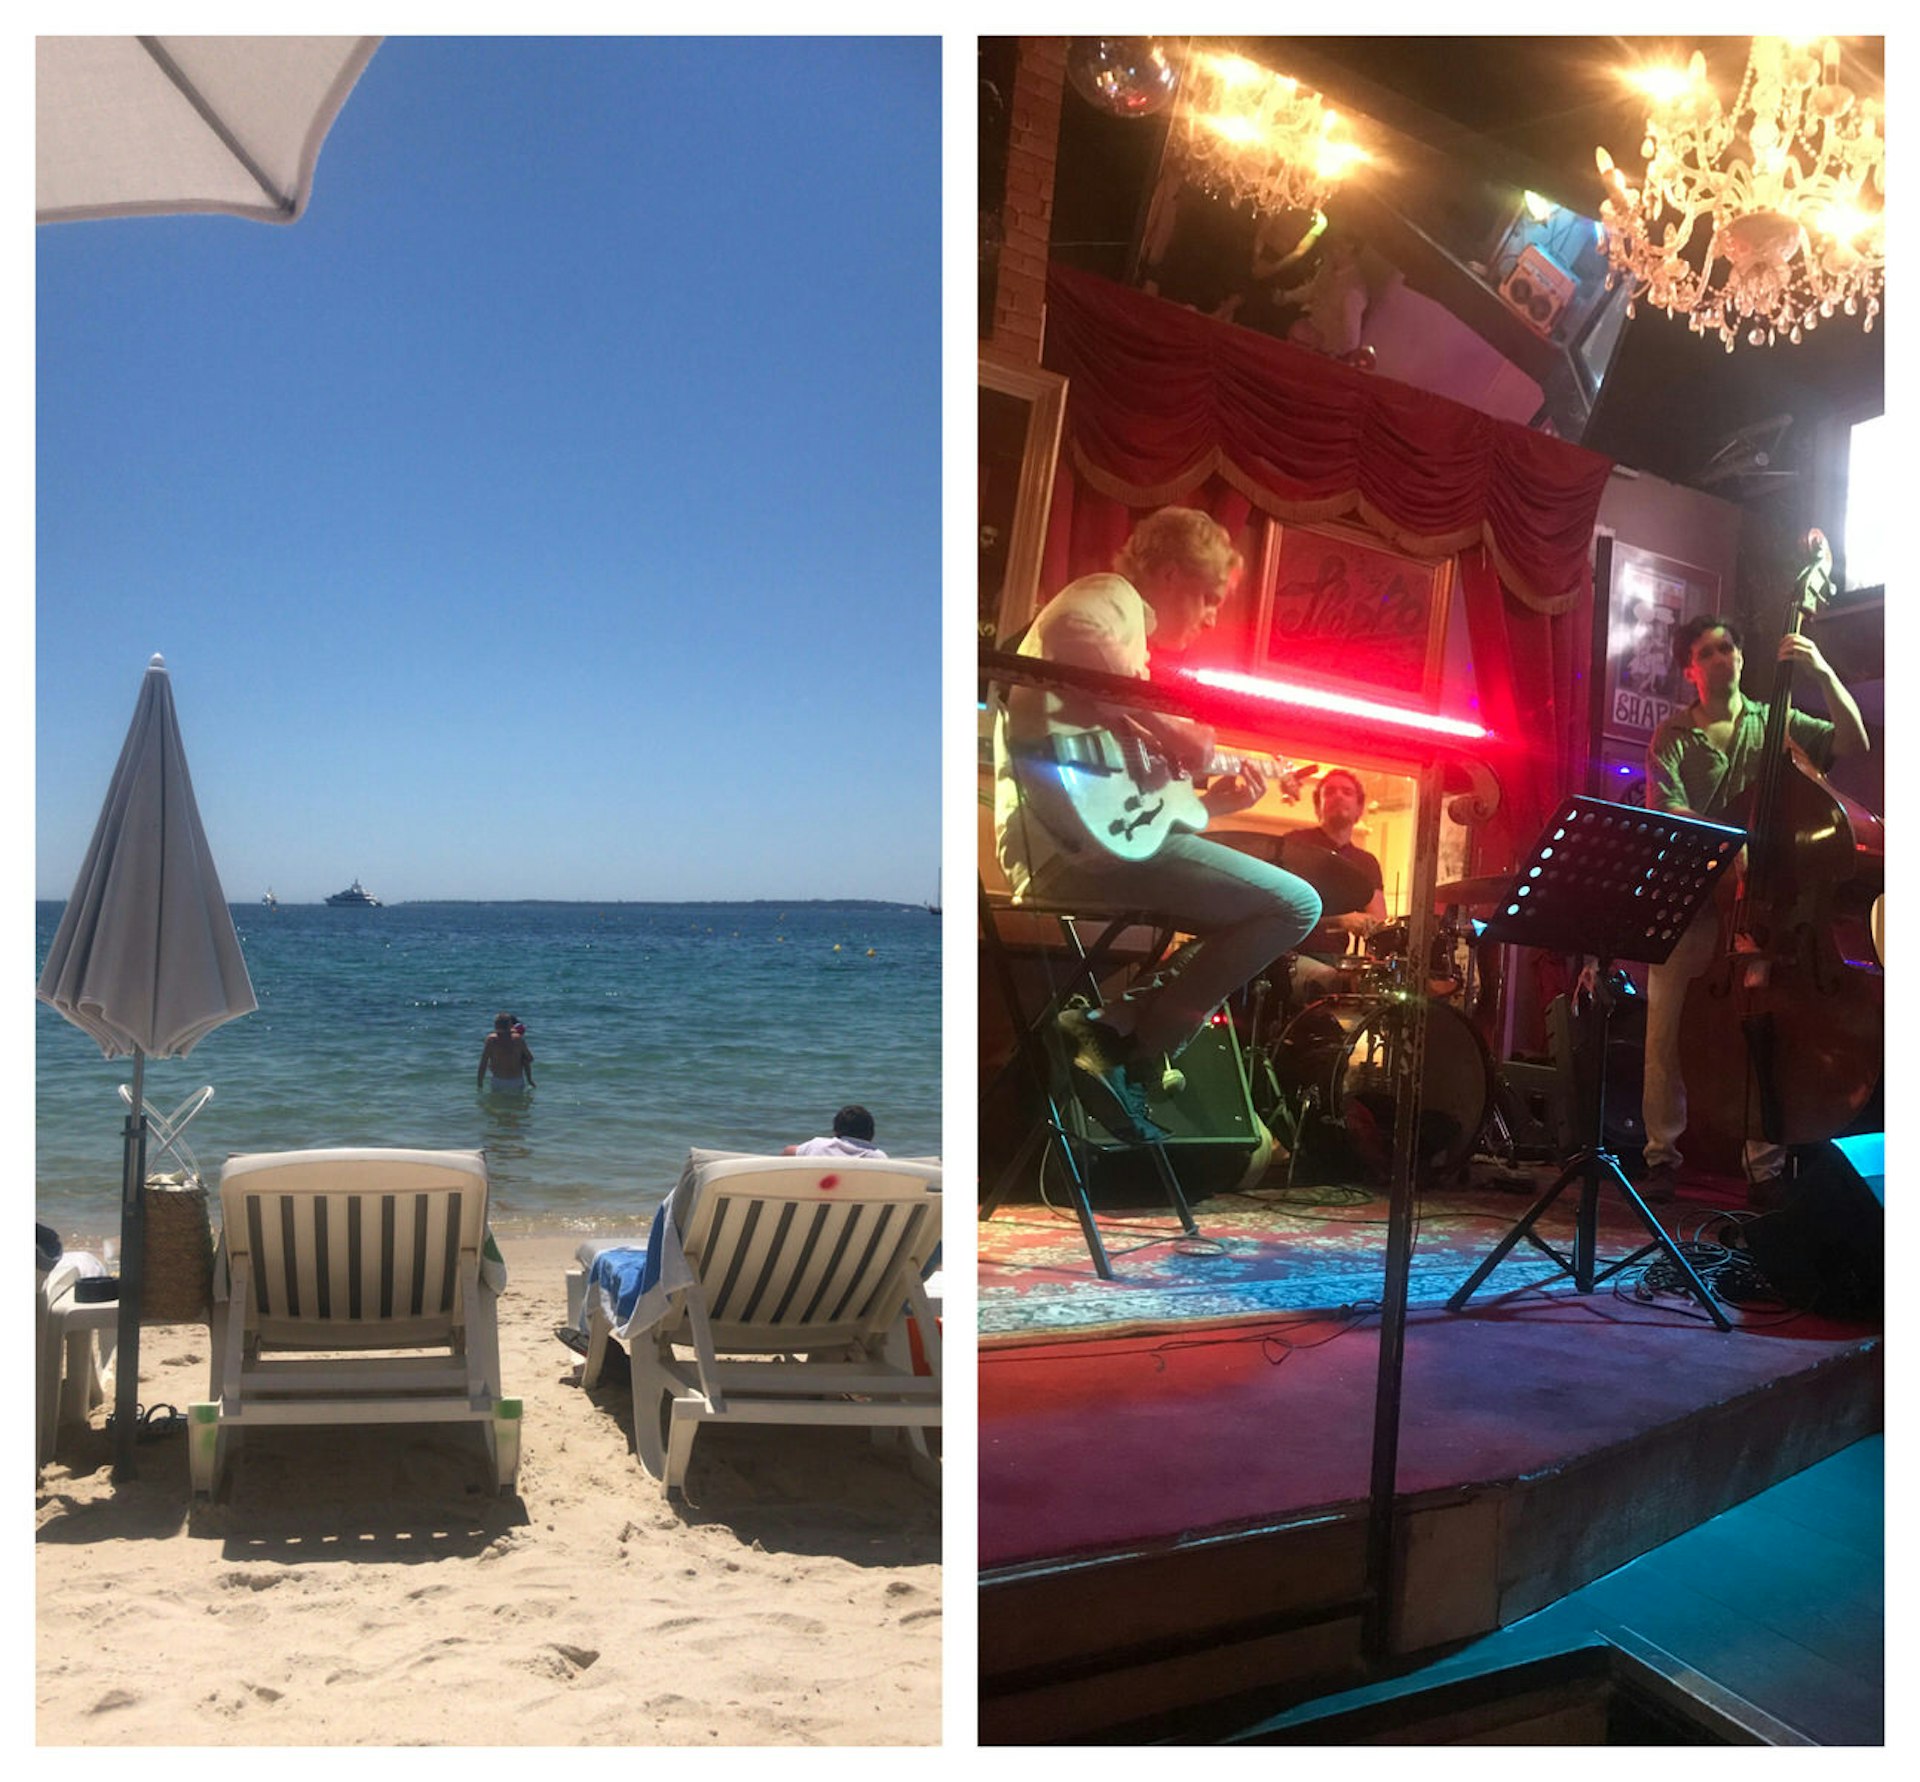 On the left is Antibes beach with two lounger chairs and an umbrella in front. Two people are in the water and the sand is fine and clean. On the right, three musicians are on stage, one with a double bass, one with guitar and one on the drums. There's a carpet on the stage and a chandelier hanging from the ceiling.